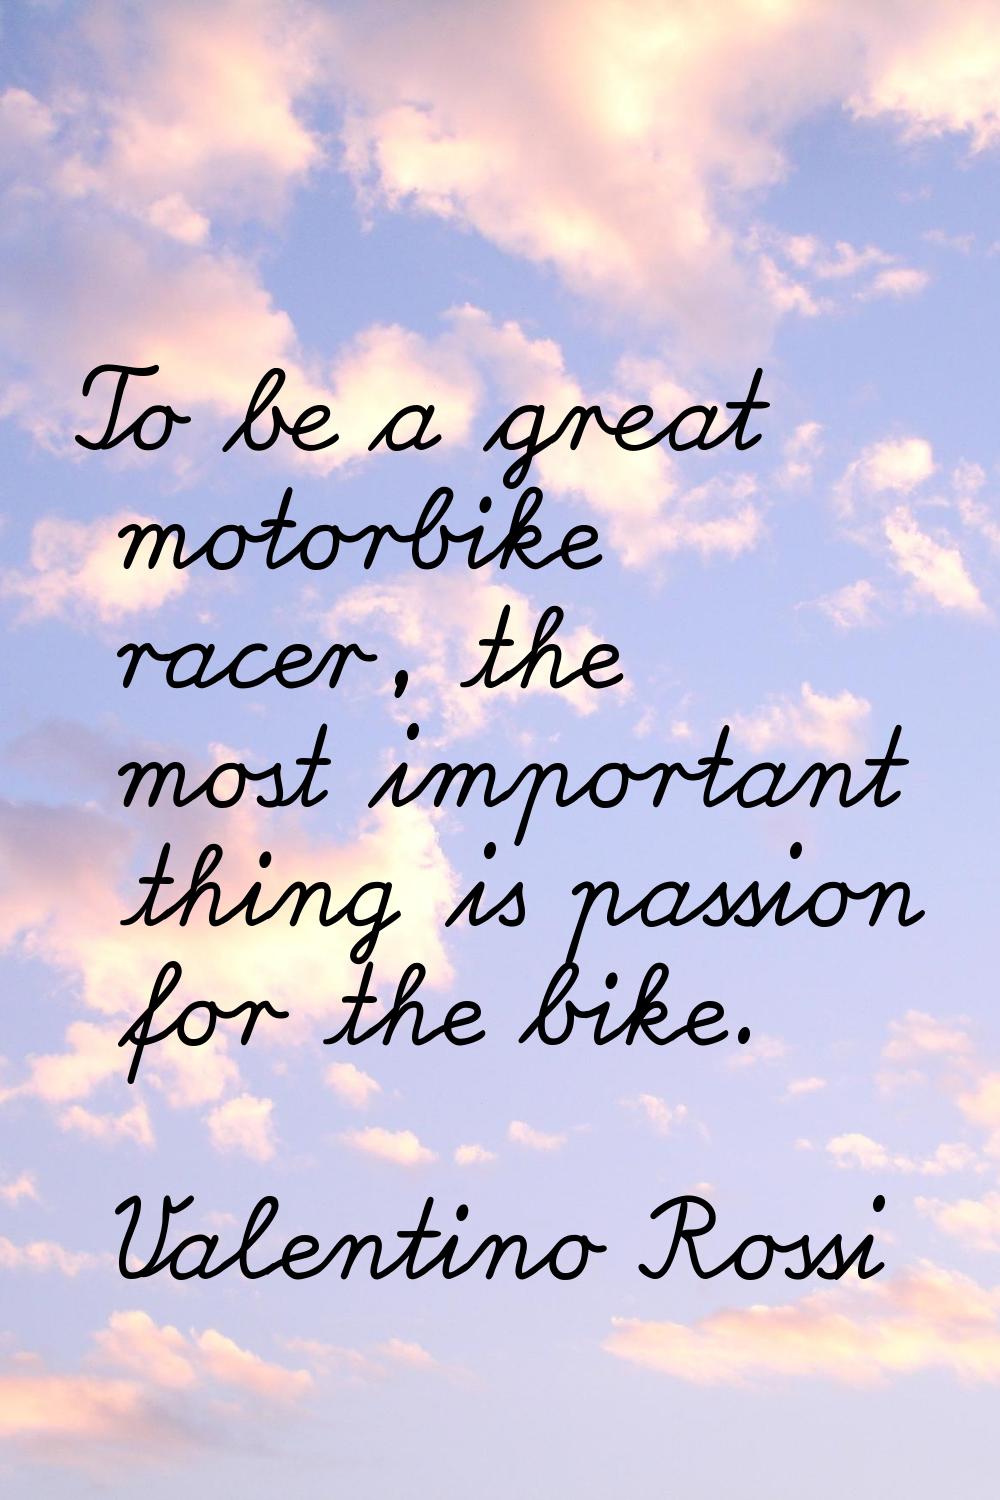 To be a great motorbike racer, the most important thing is passion for the bike.